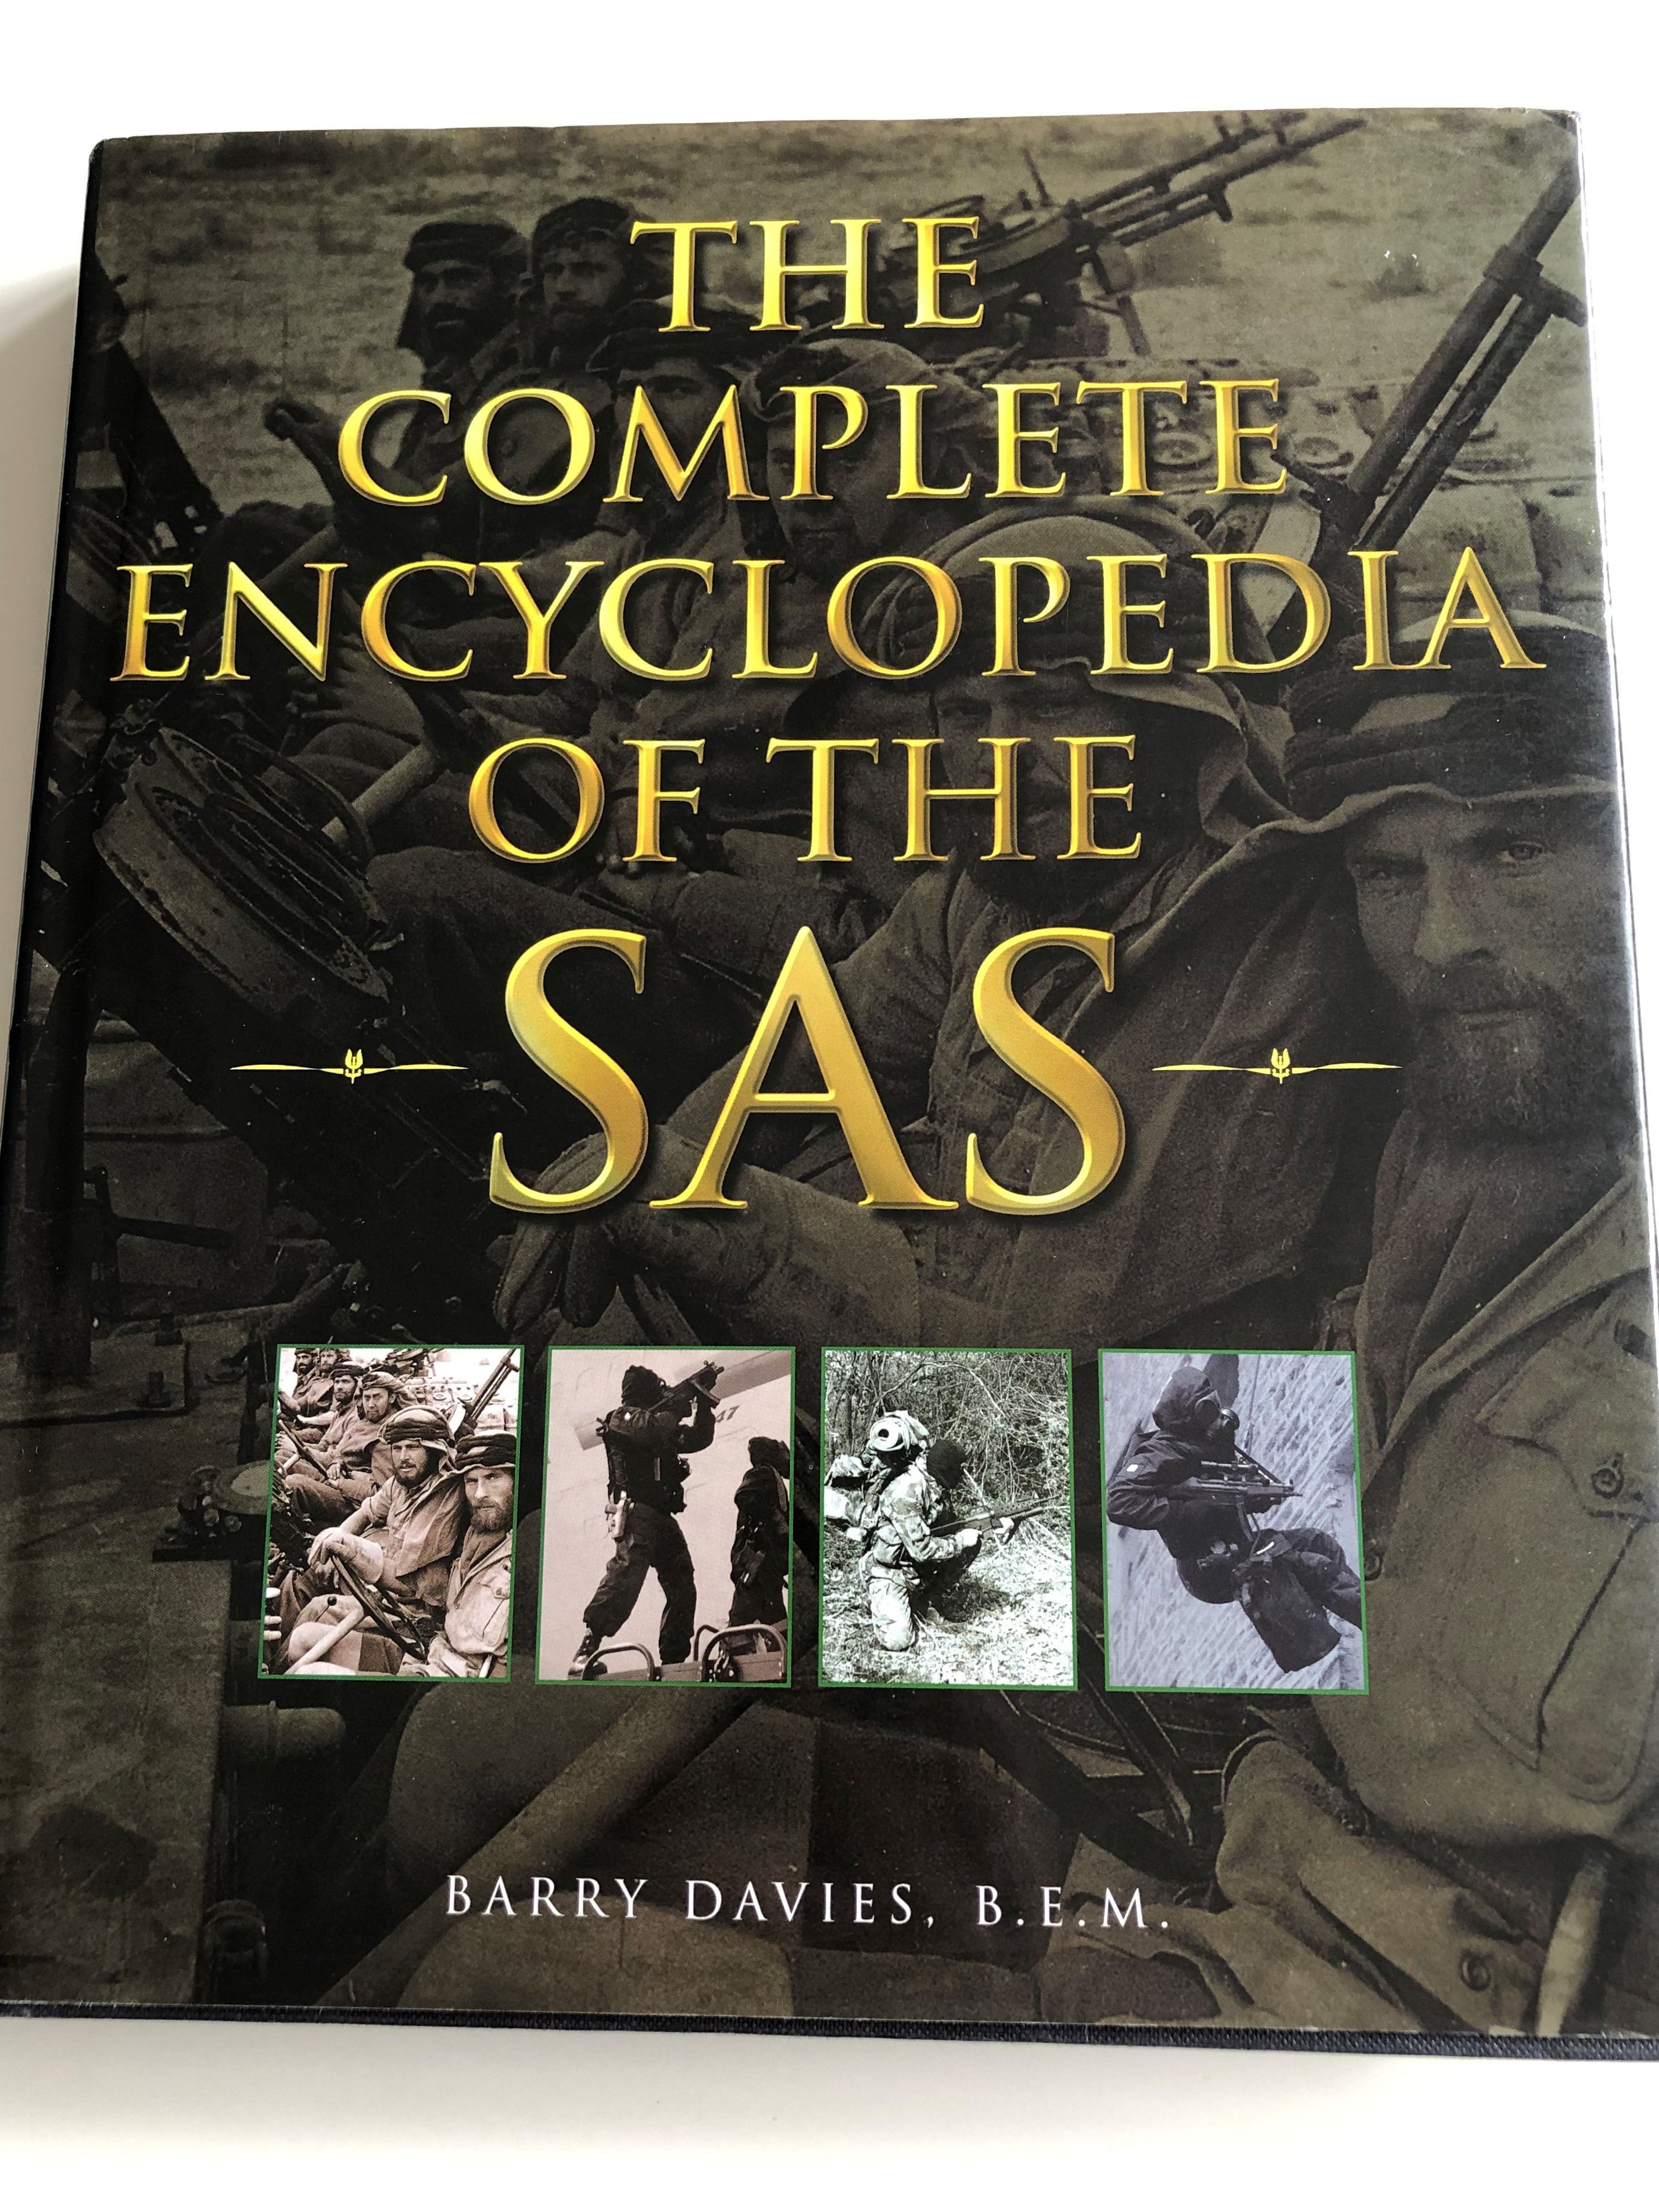 the-complete-encyclopedia-of-the-sas-by-barry-davies-b.e.m-hardcover-1998-history-of-the-british-special-air-service-1-.jpg